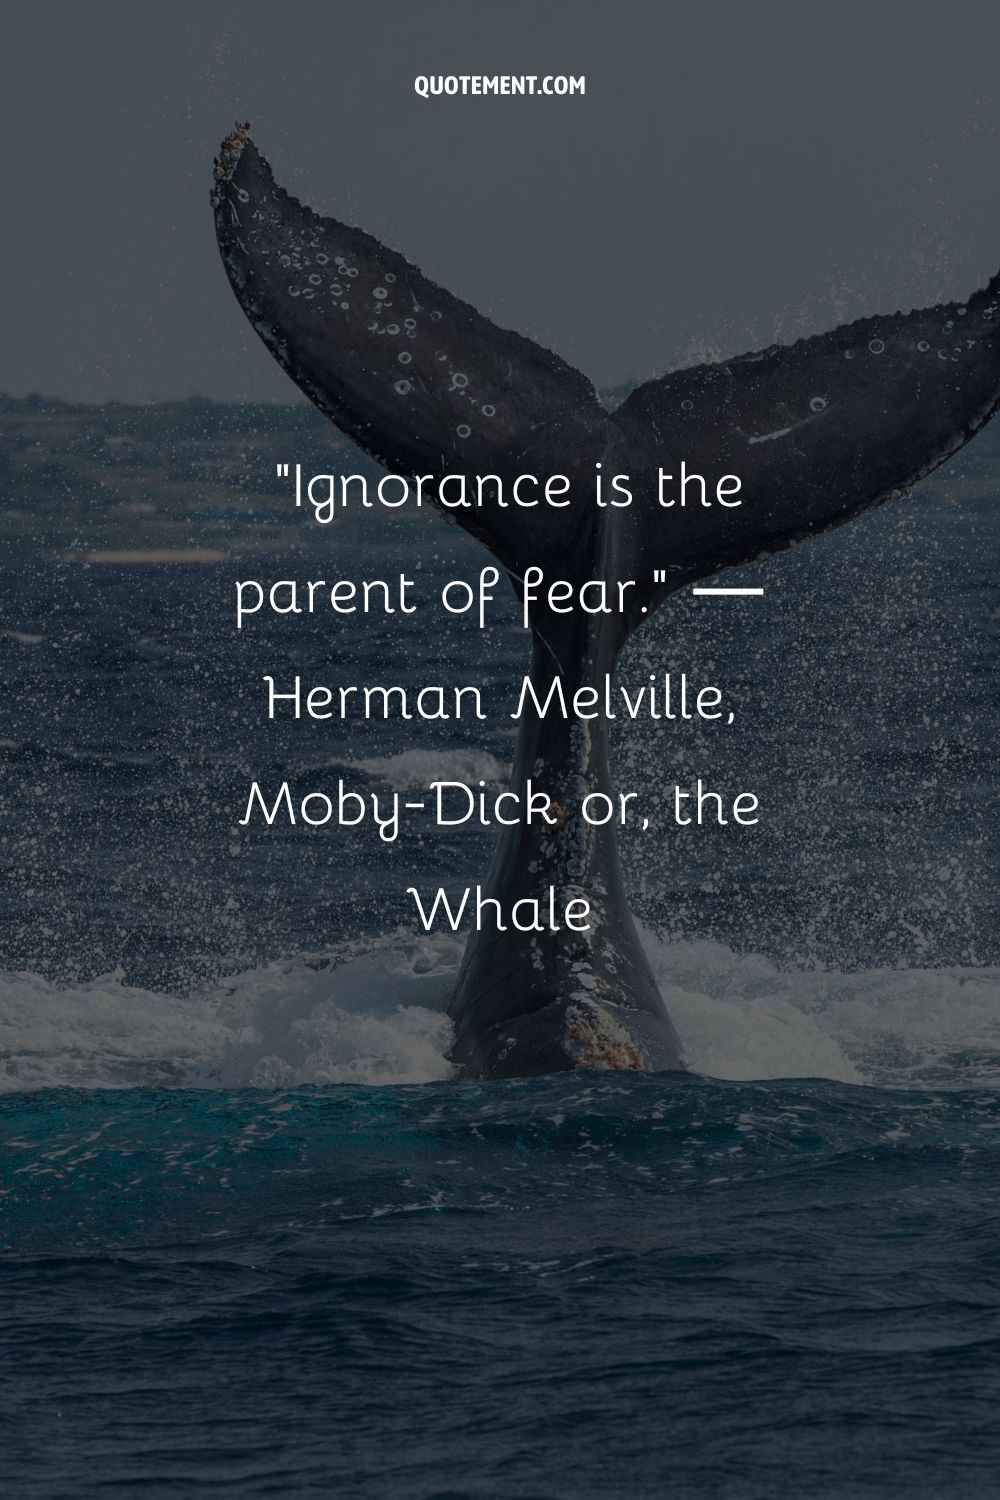 Ignorance is the parent of fear.